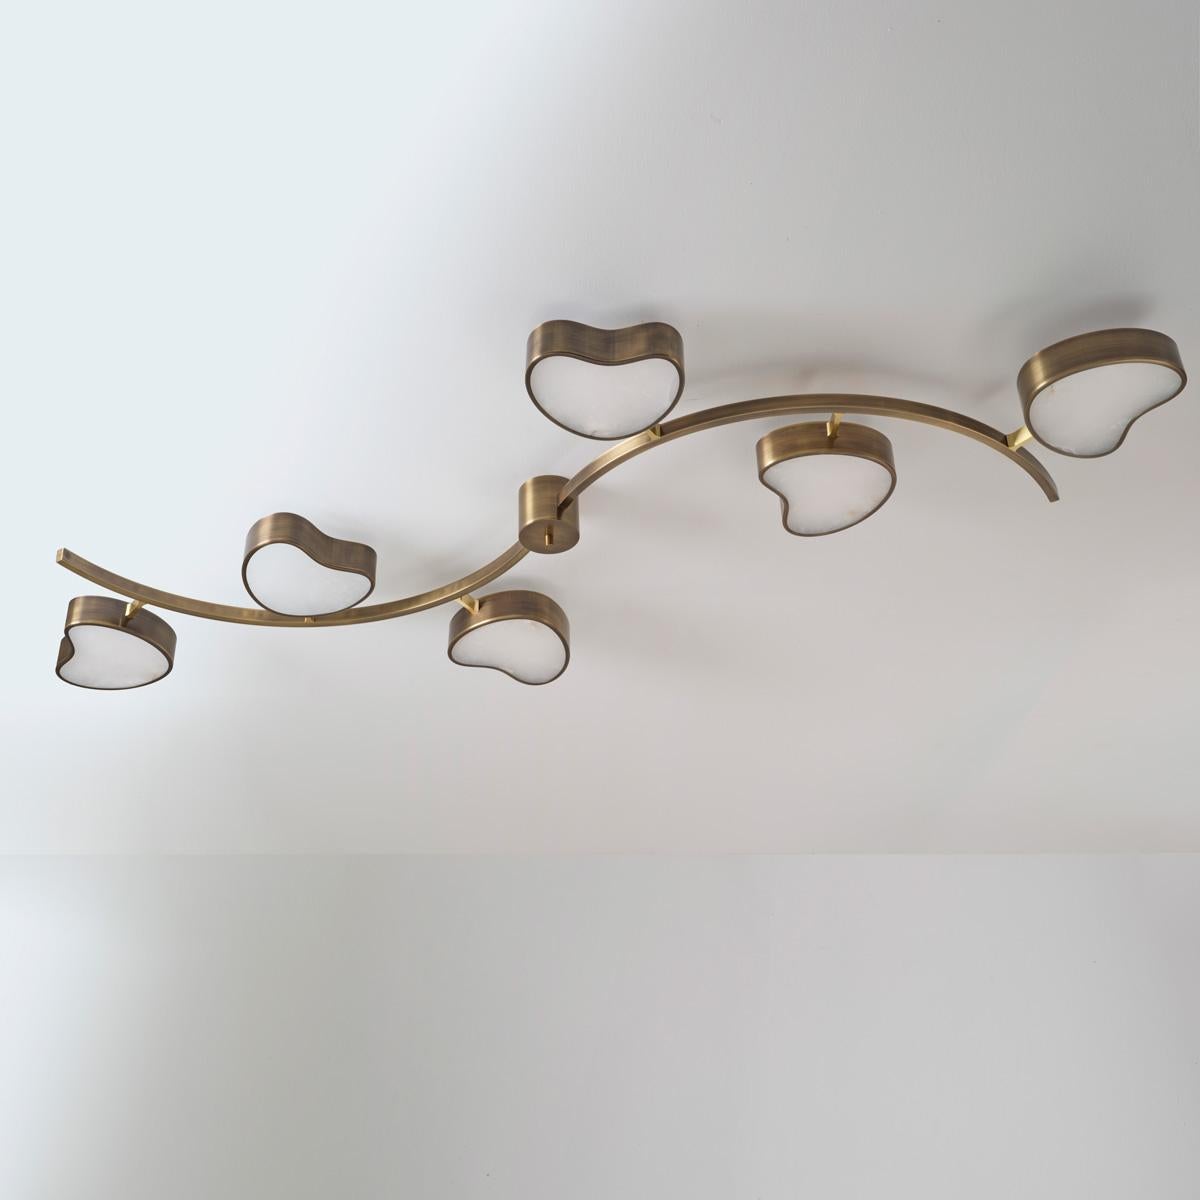 Cuore N.6 Ceiling Light by Gaspare Asaro. Bronze and Satin Brass Finish For Sale 3